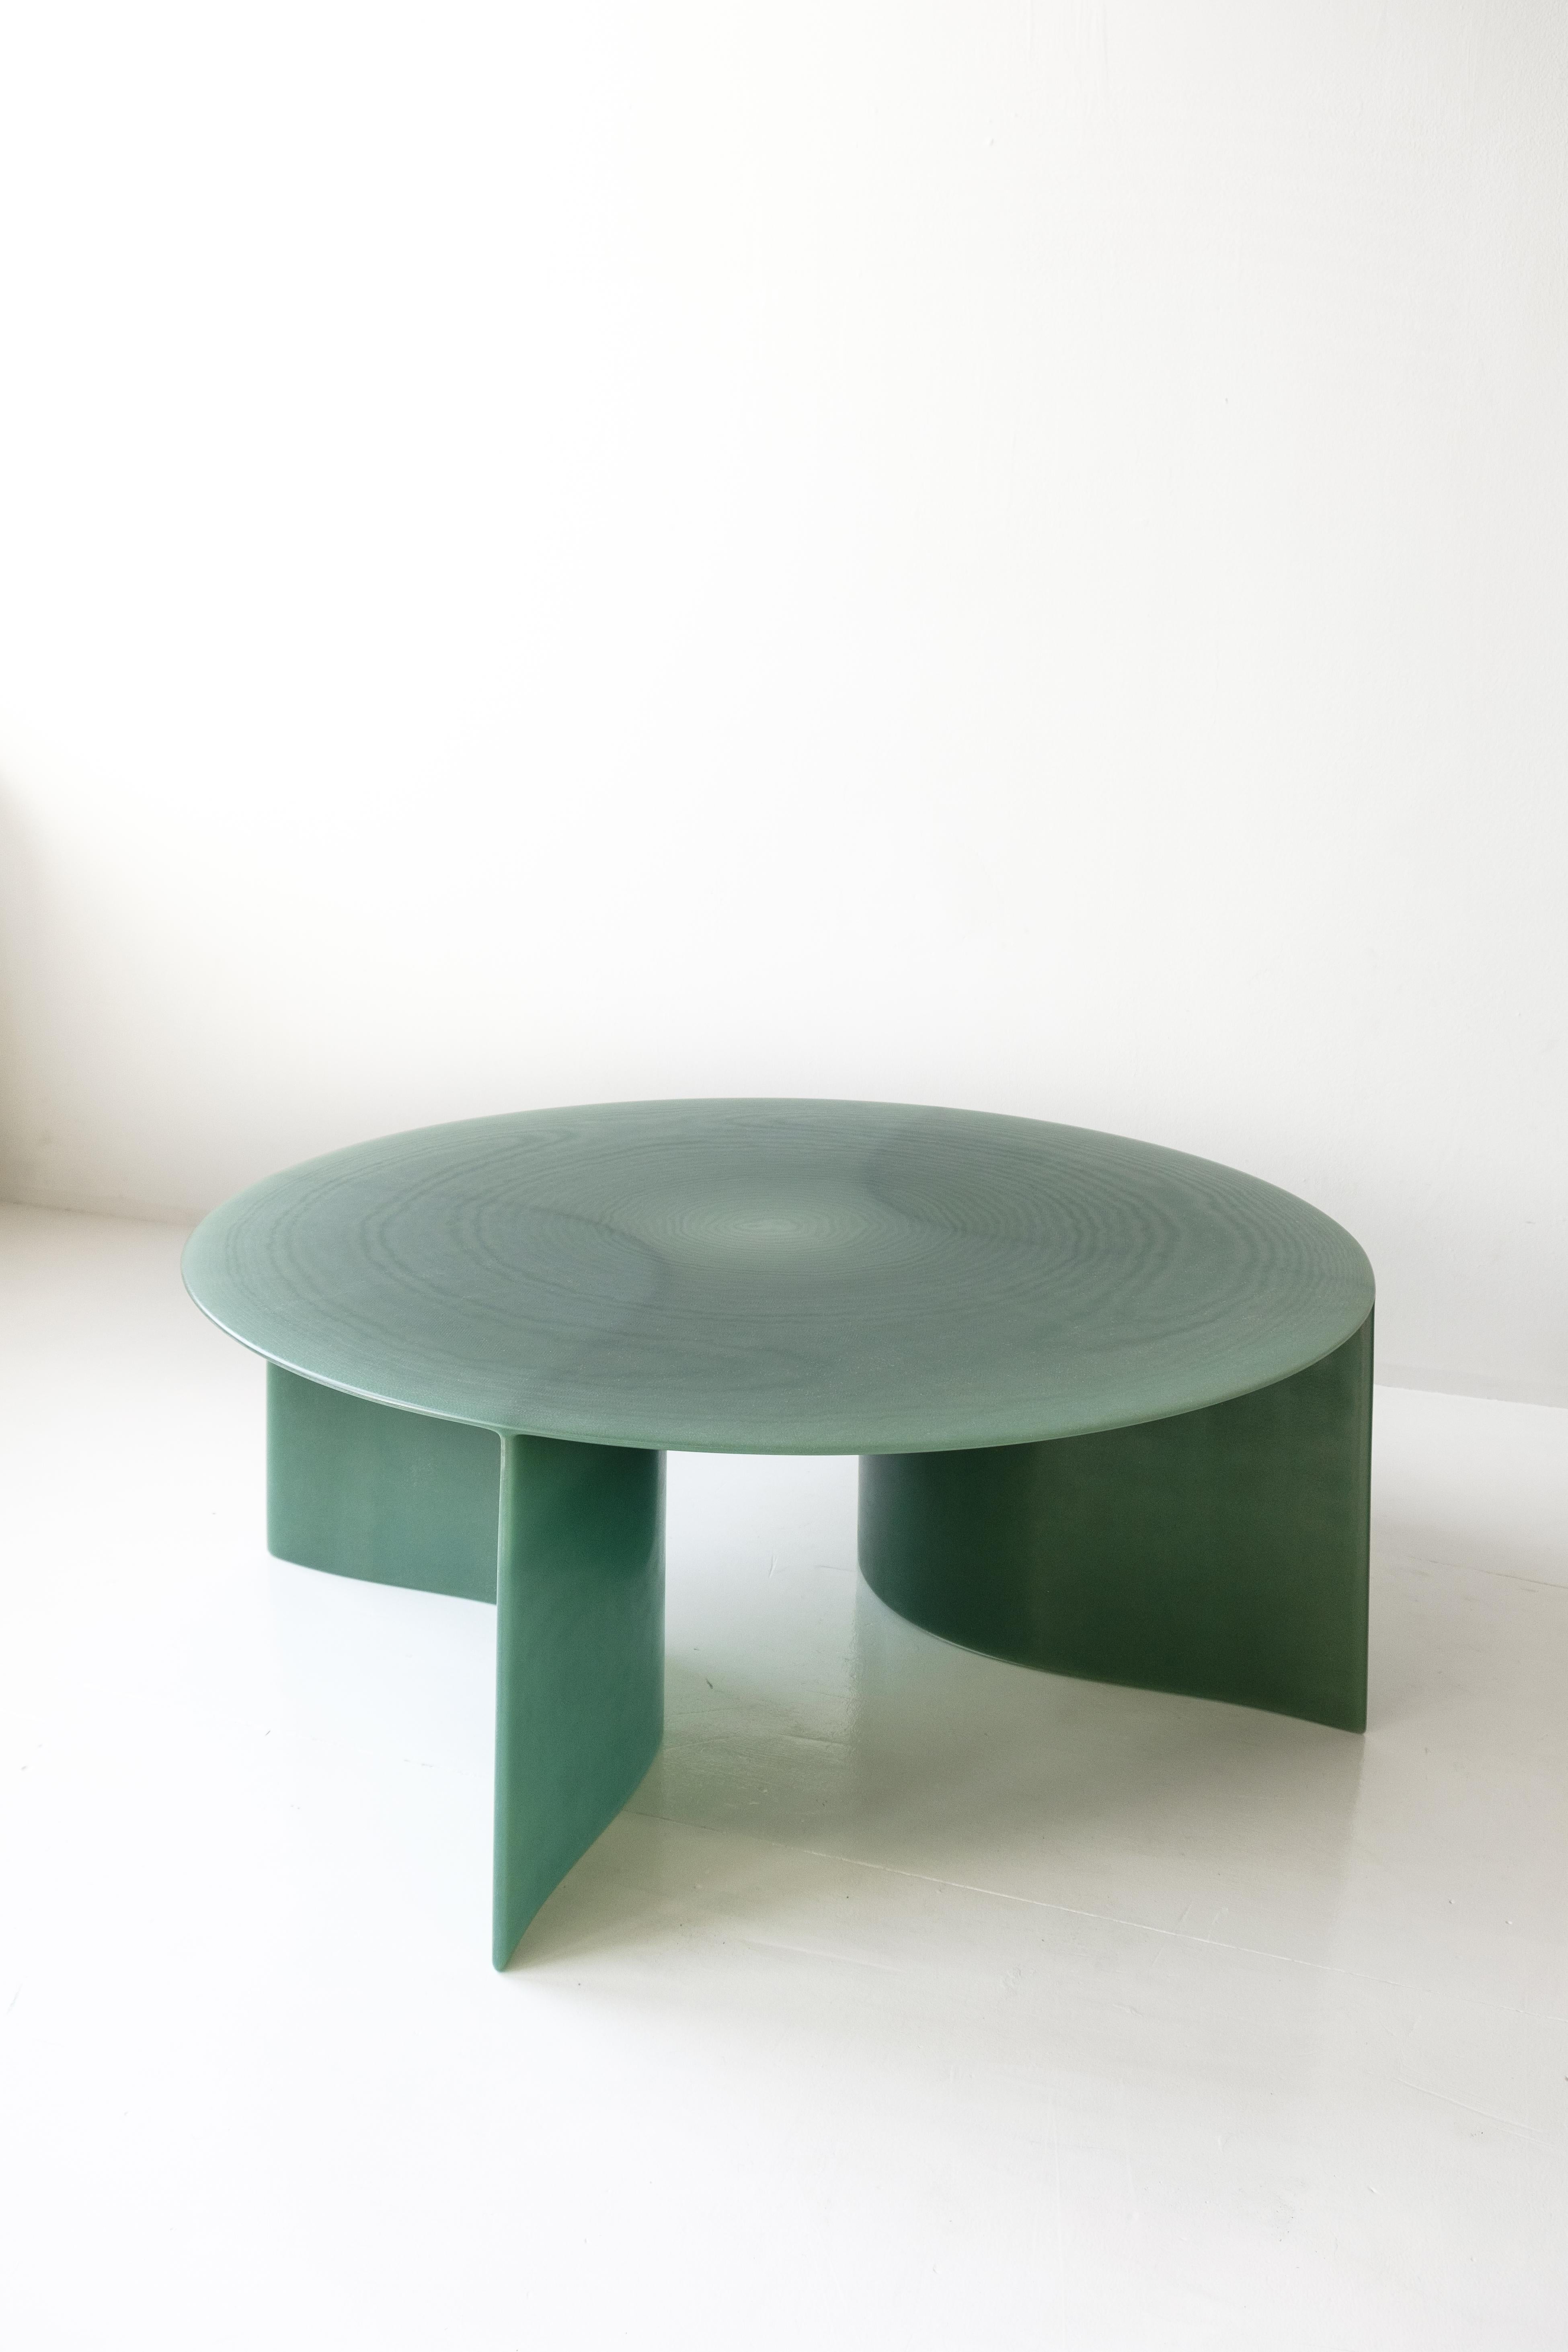 Contemporary Green Fiberglass, New Wave Coffee Table Round 100cm, by Lukas Cober For Sale 1